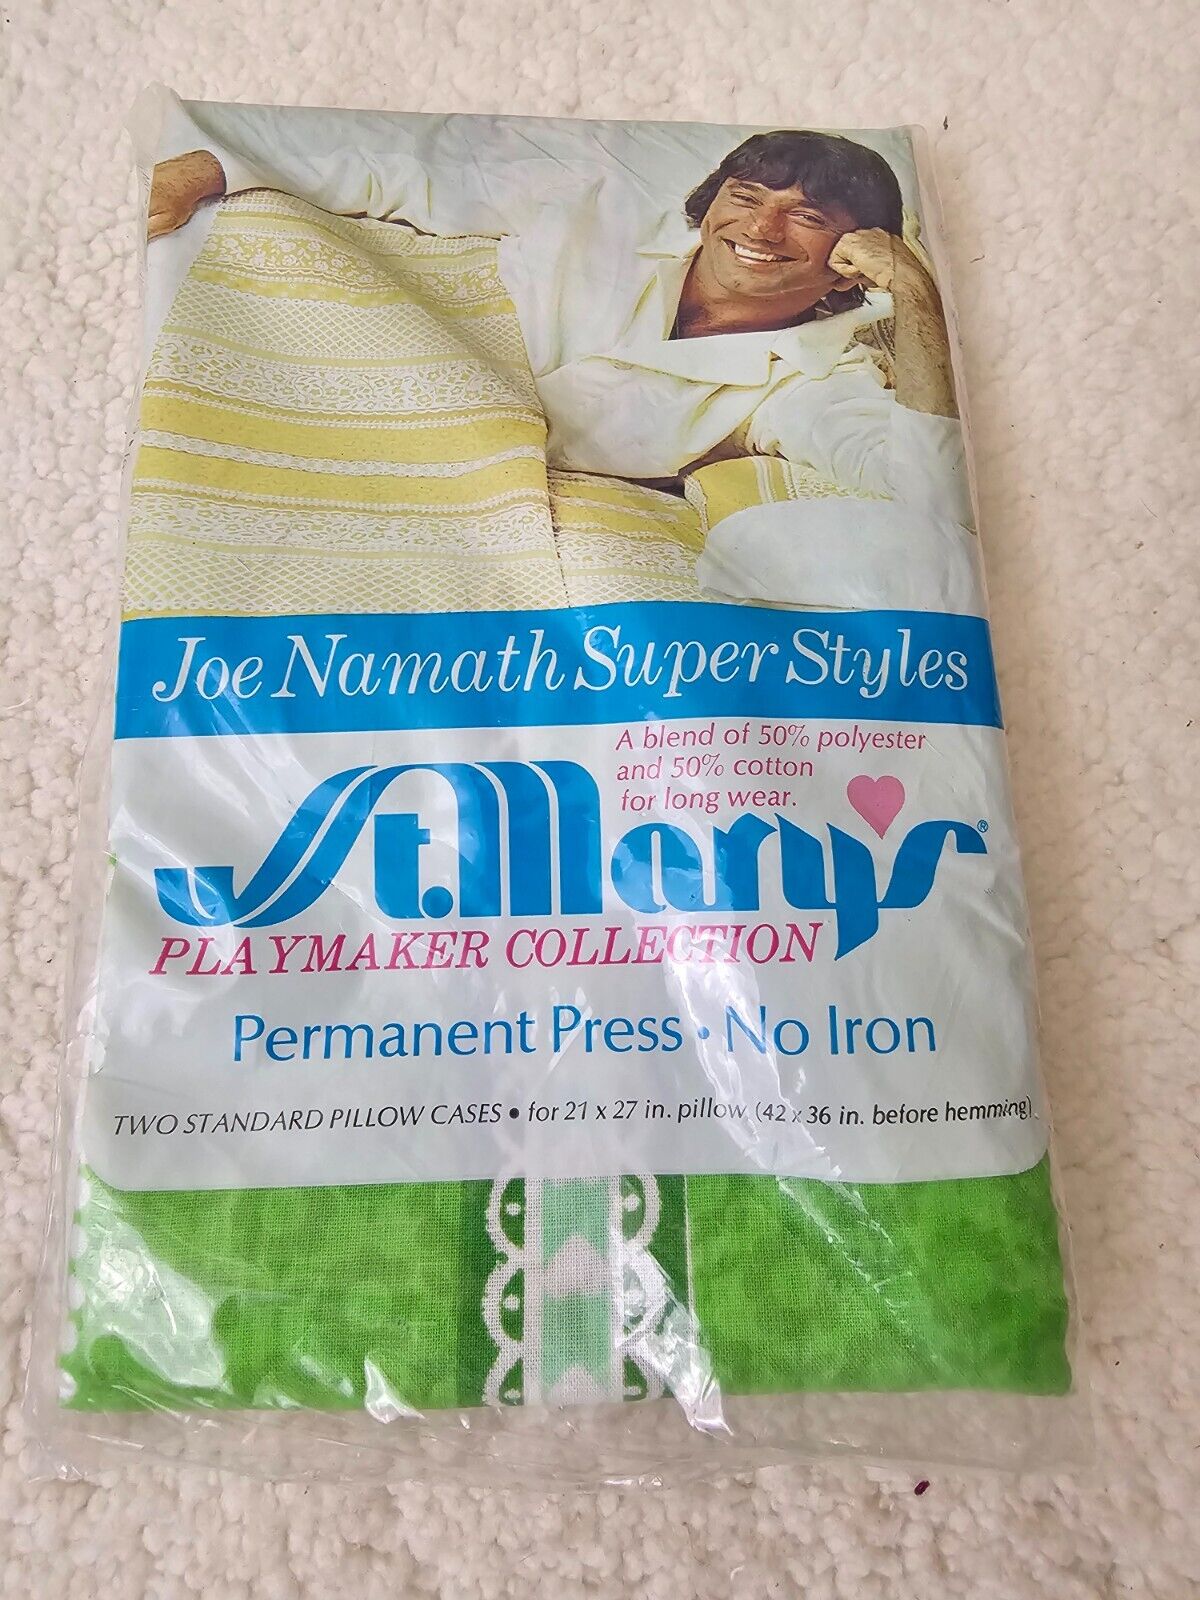 Vintage NOS St. Mary's Playmaker Collection Joe Namath Super Styles Pillowcases